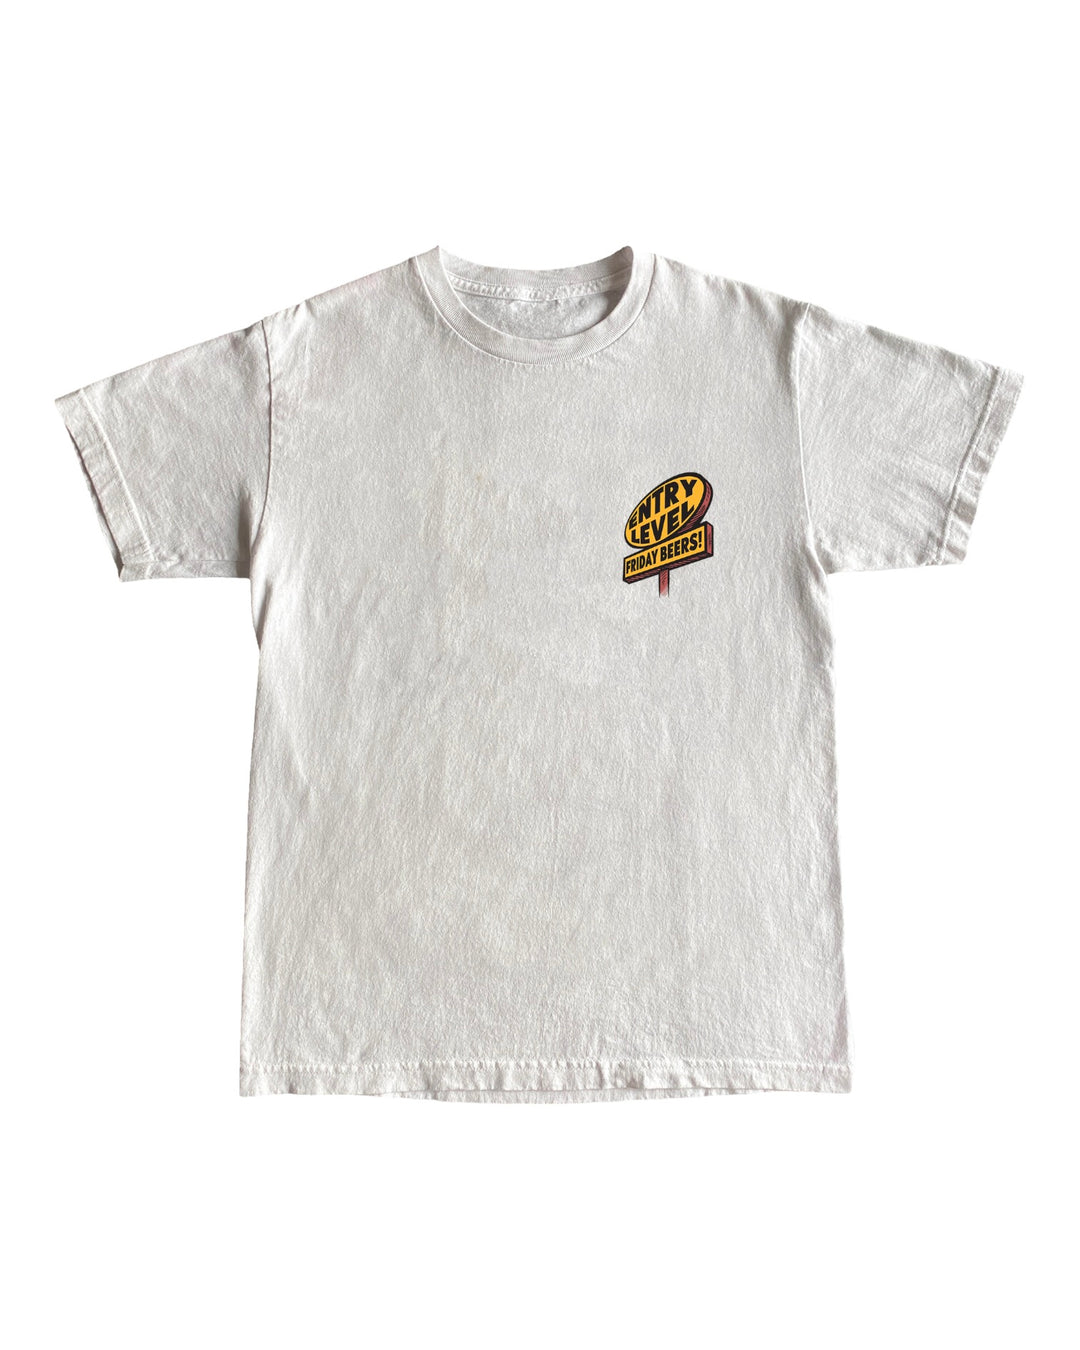 Rusty's Garage Tee - Entry Level Collab